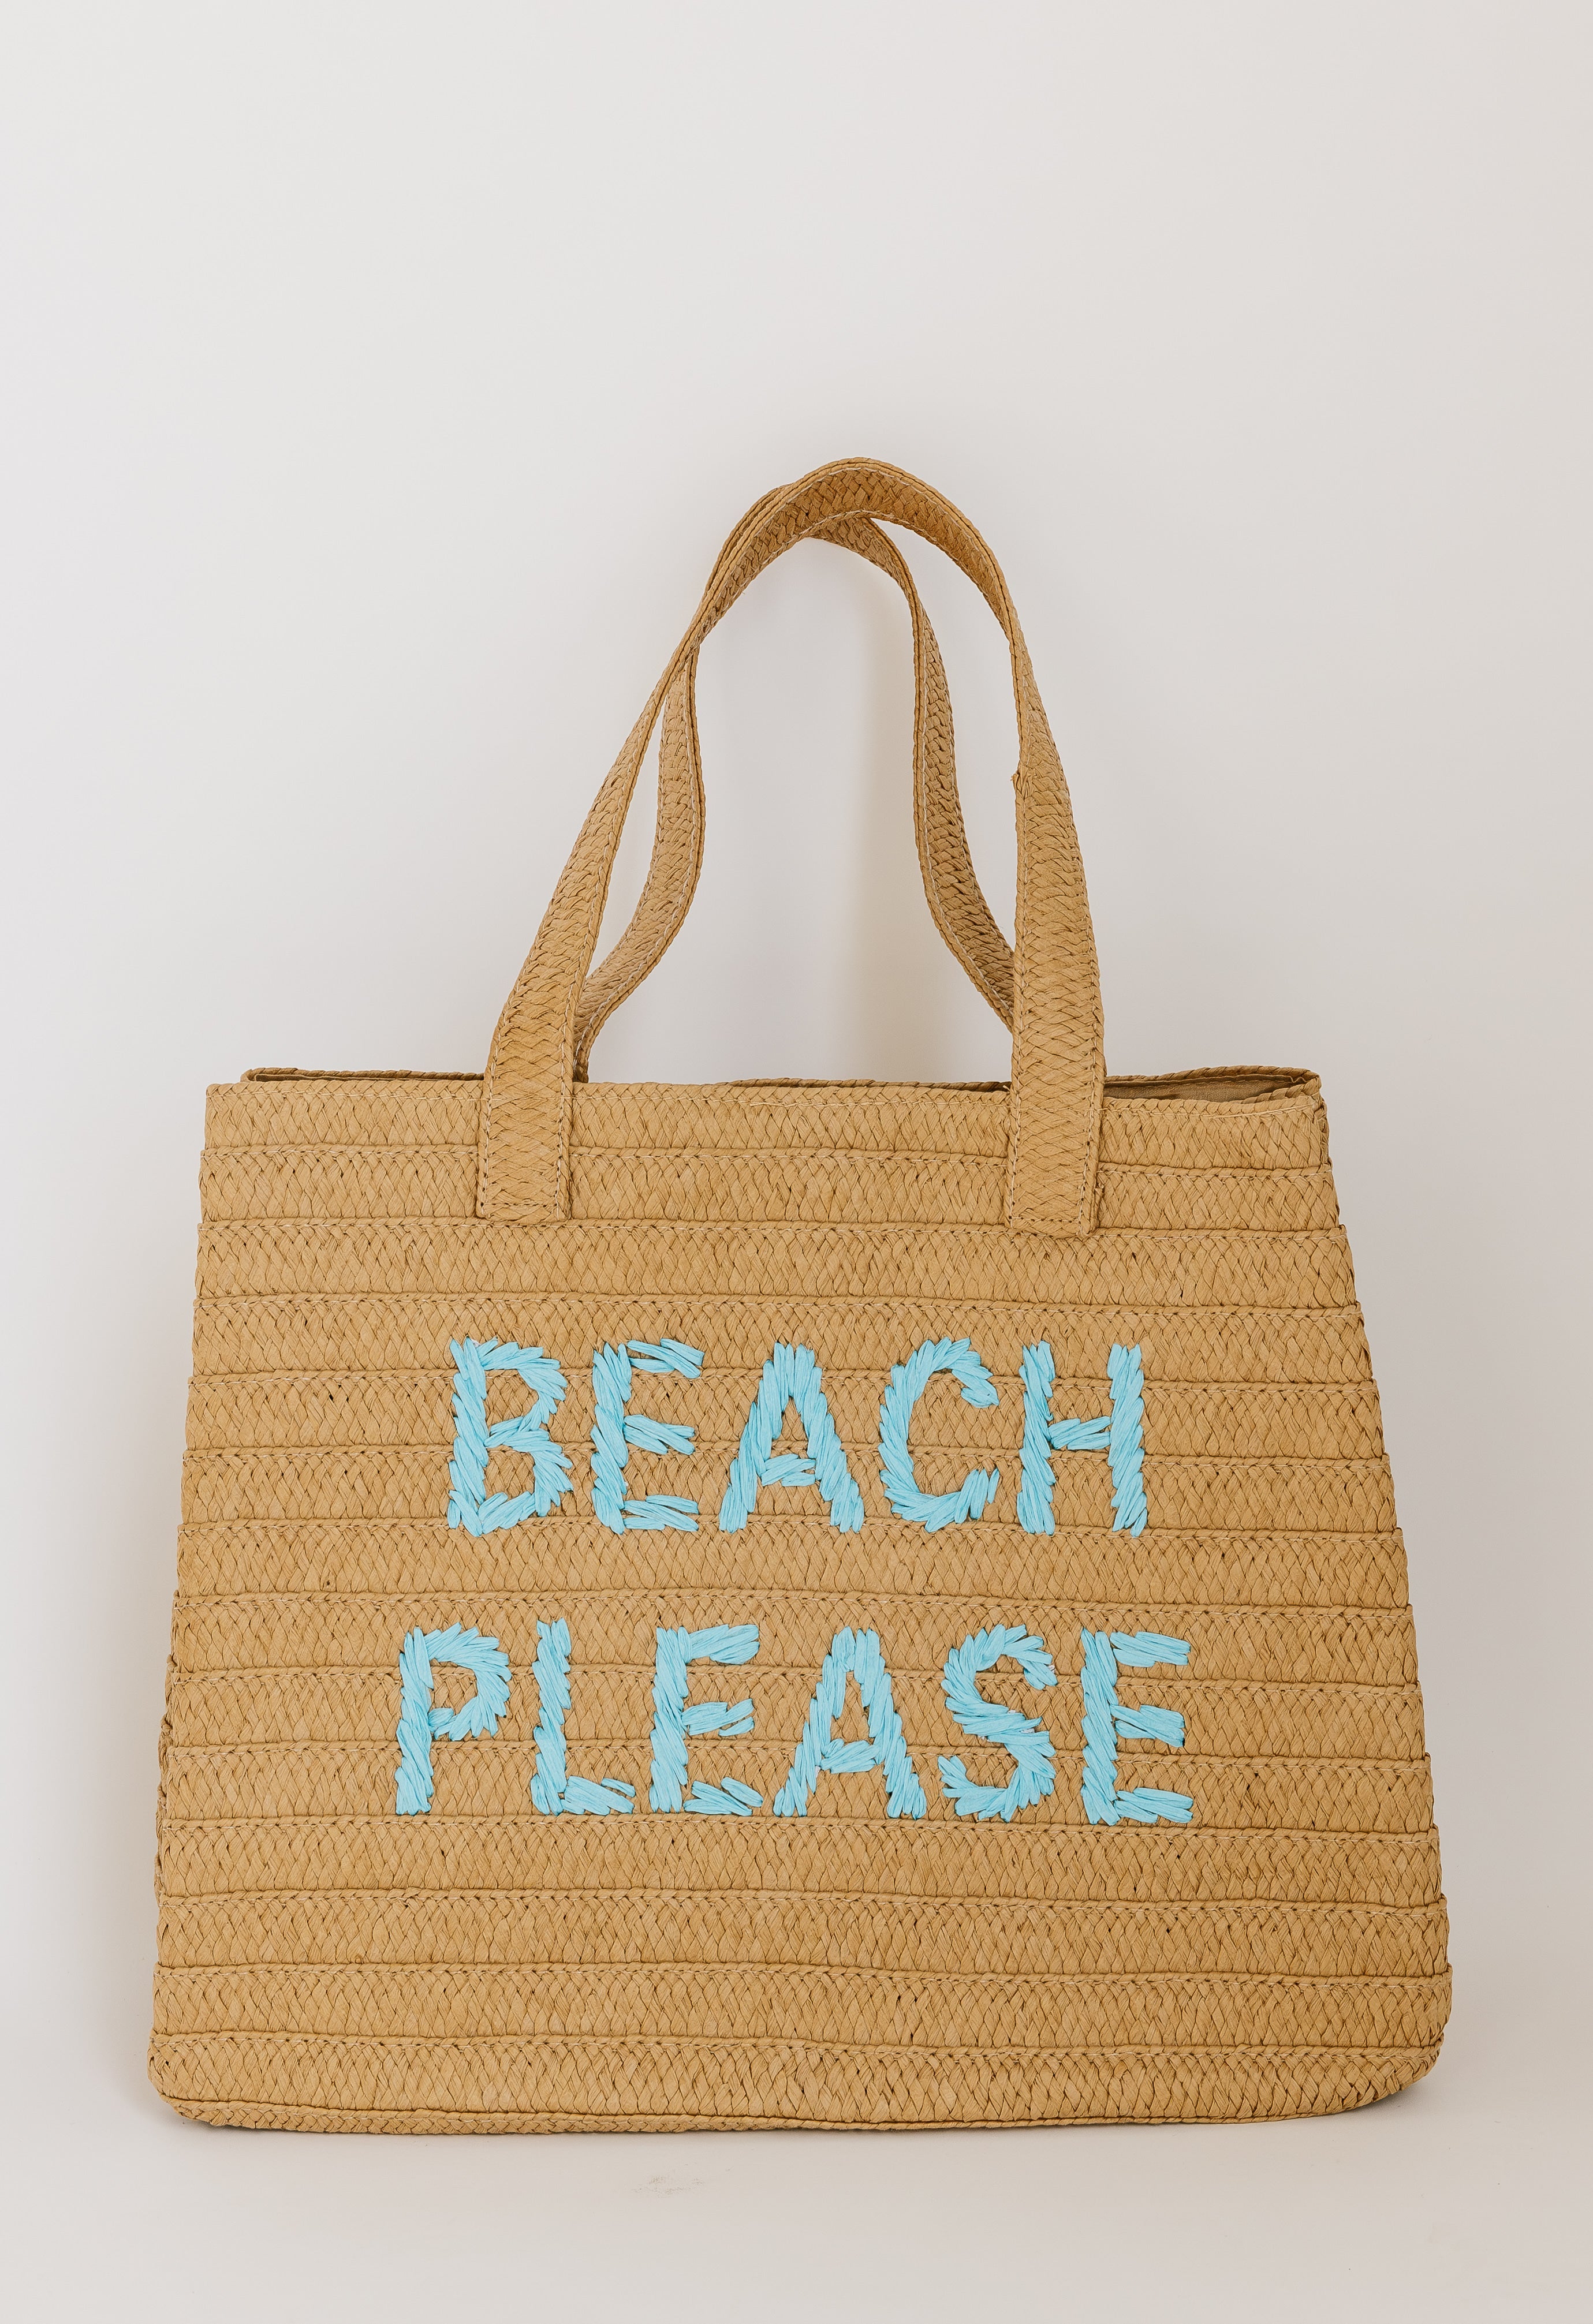 Beach Please Tote - willows clothing Tote